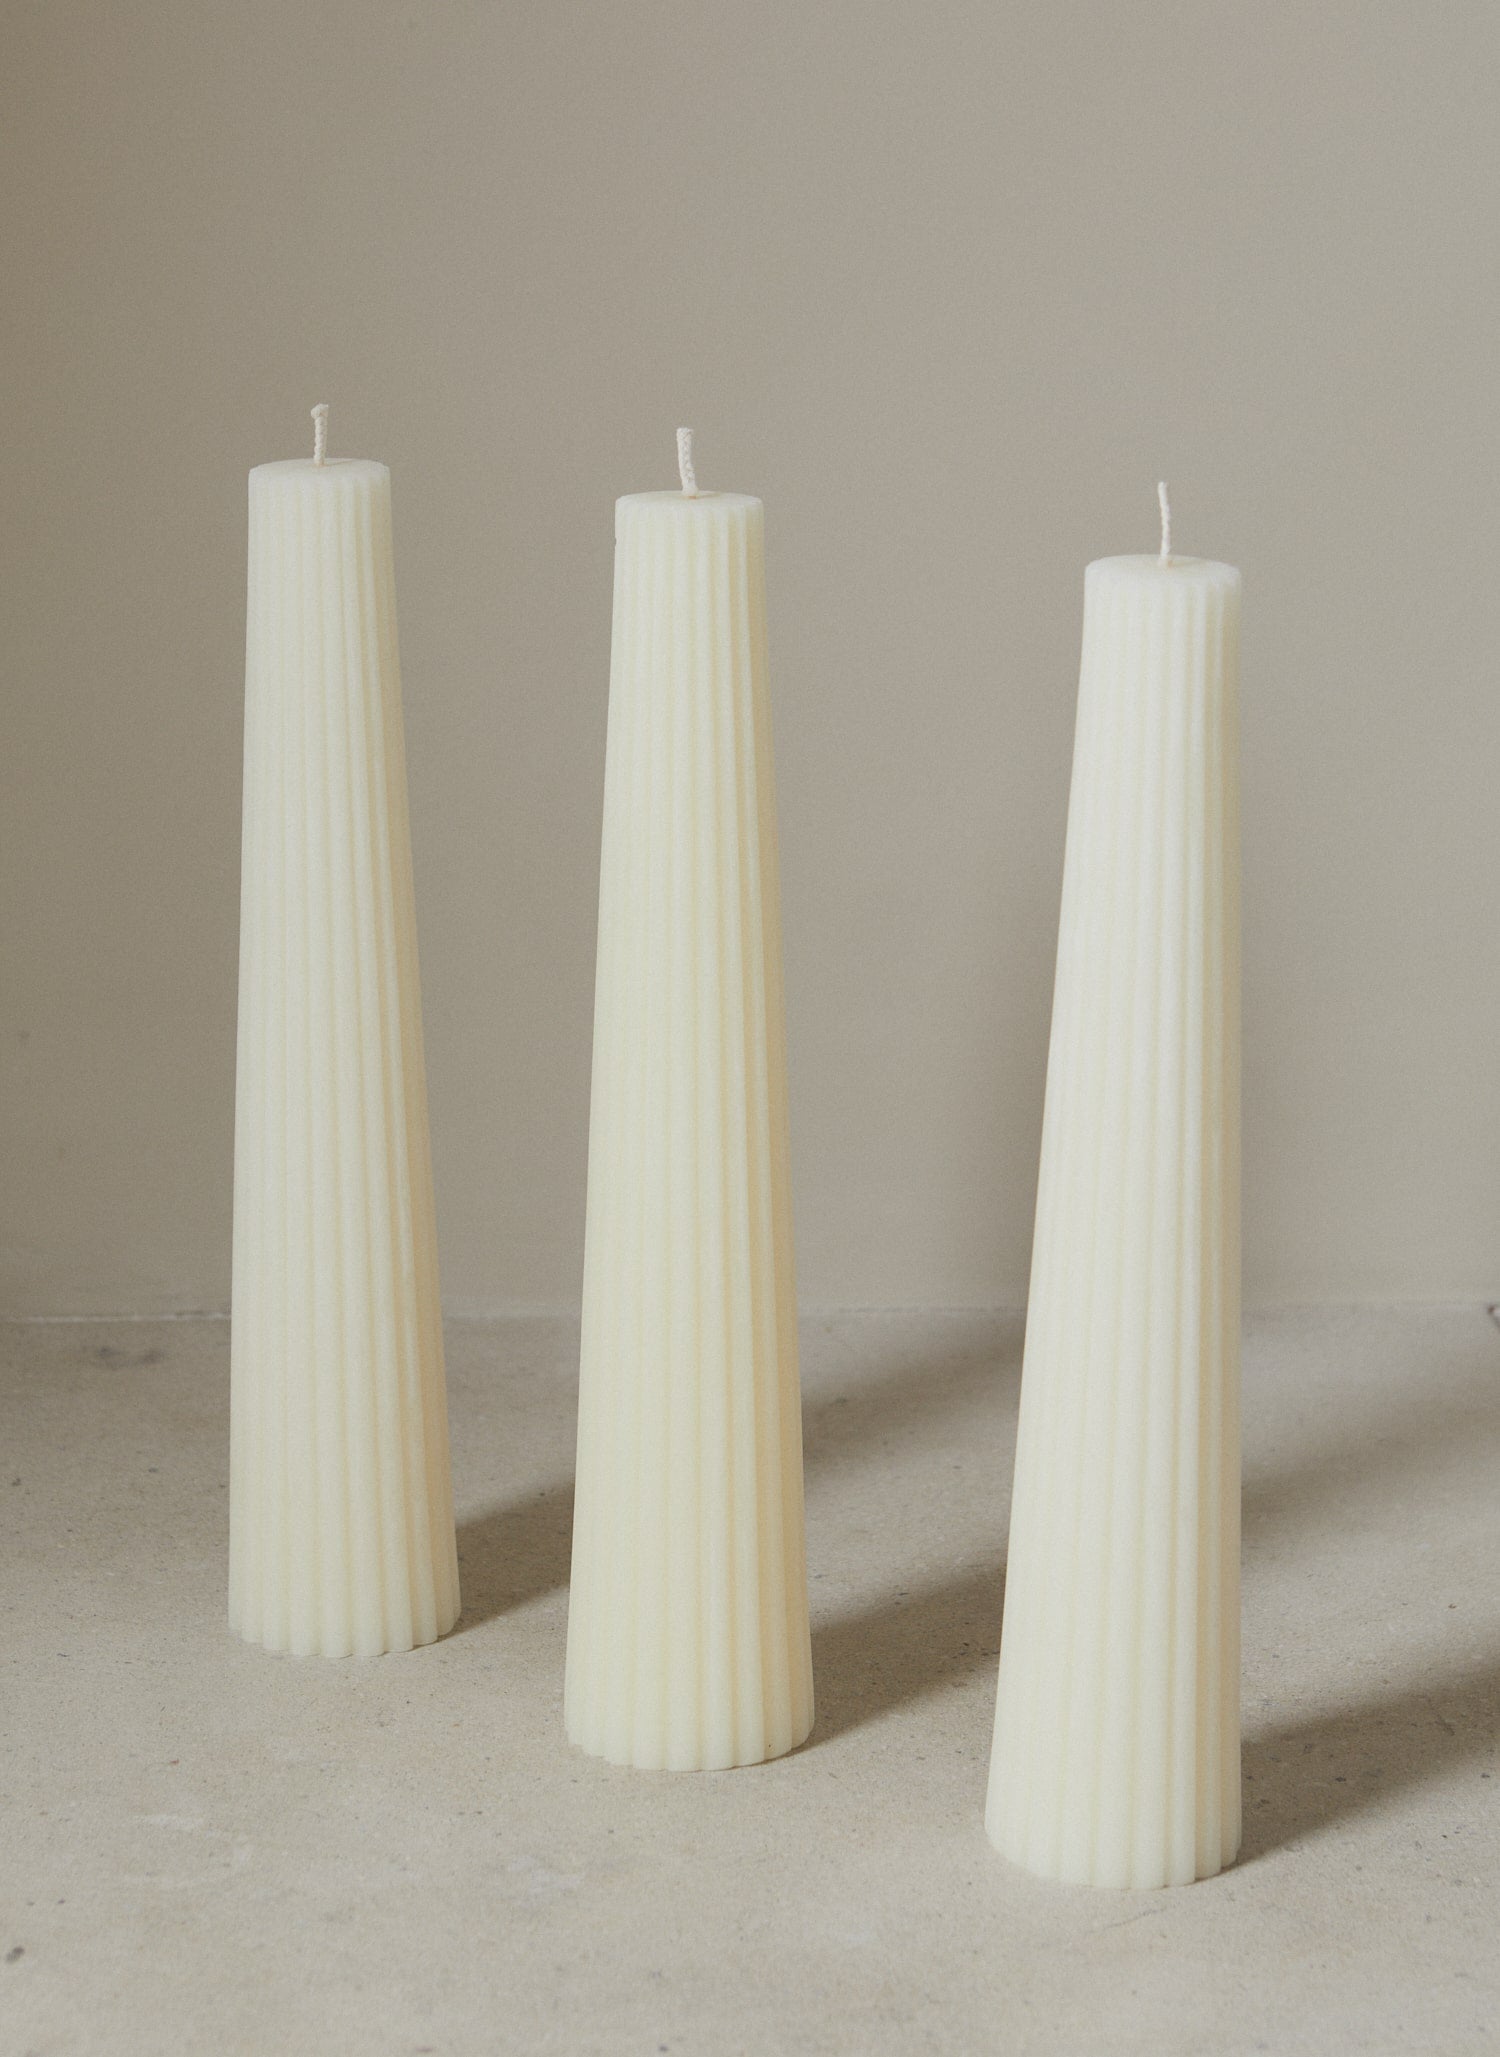 Statement textured tapered pillar candle made from 100% American Beeswax in cream.